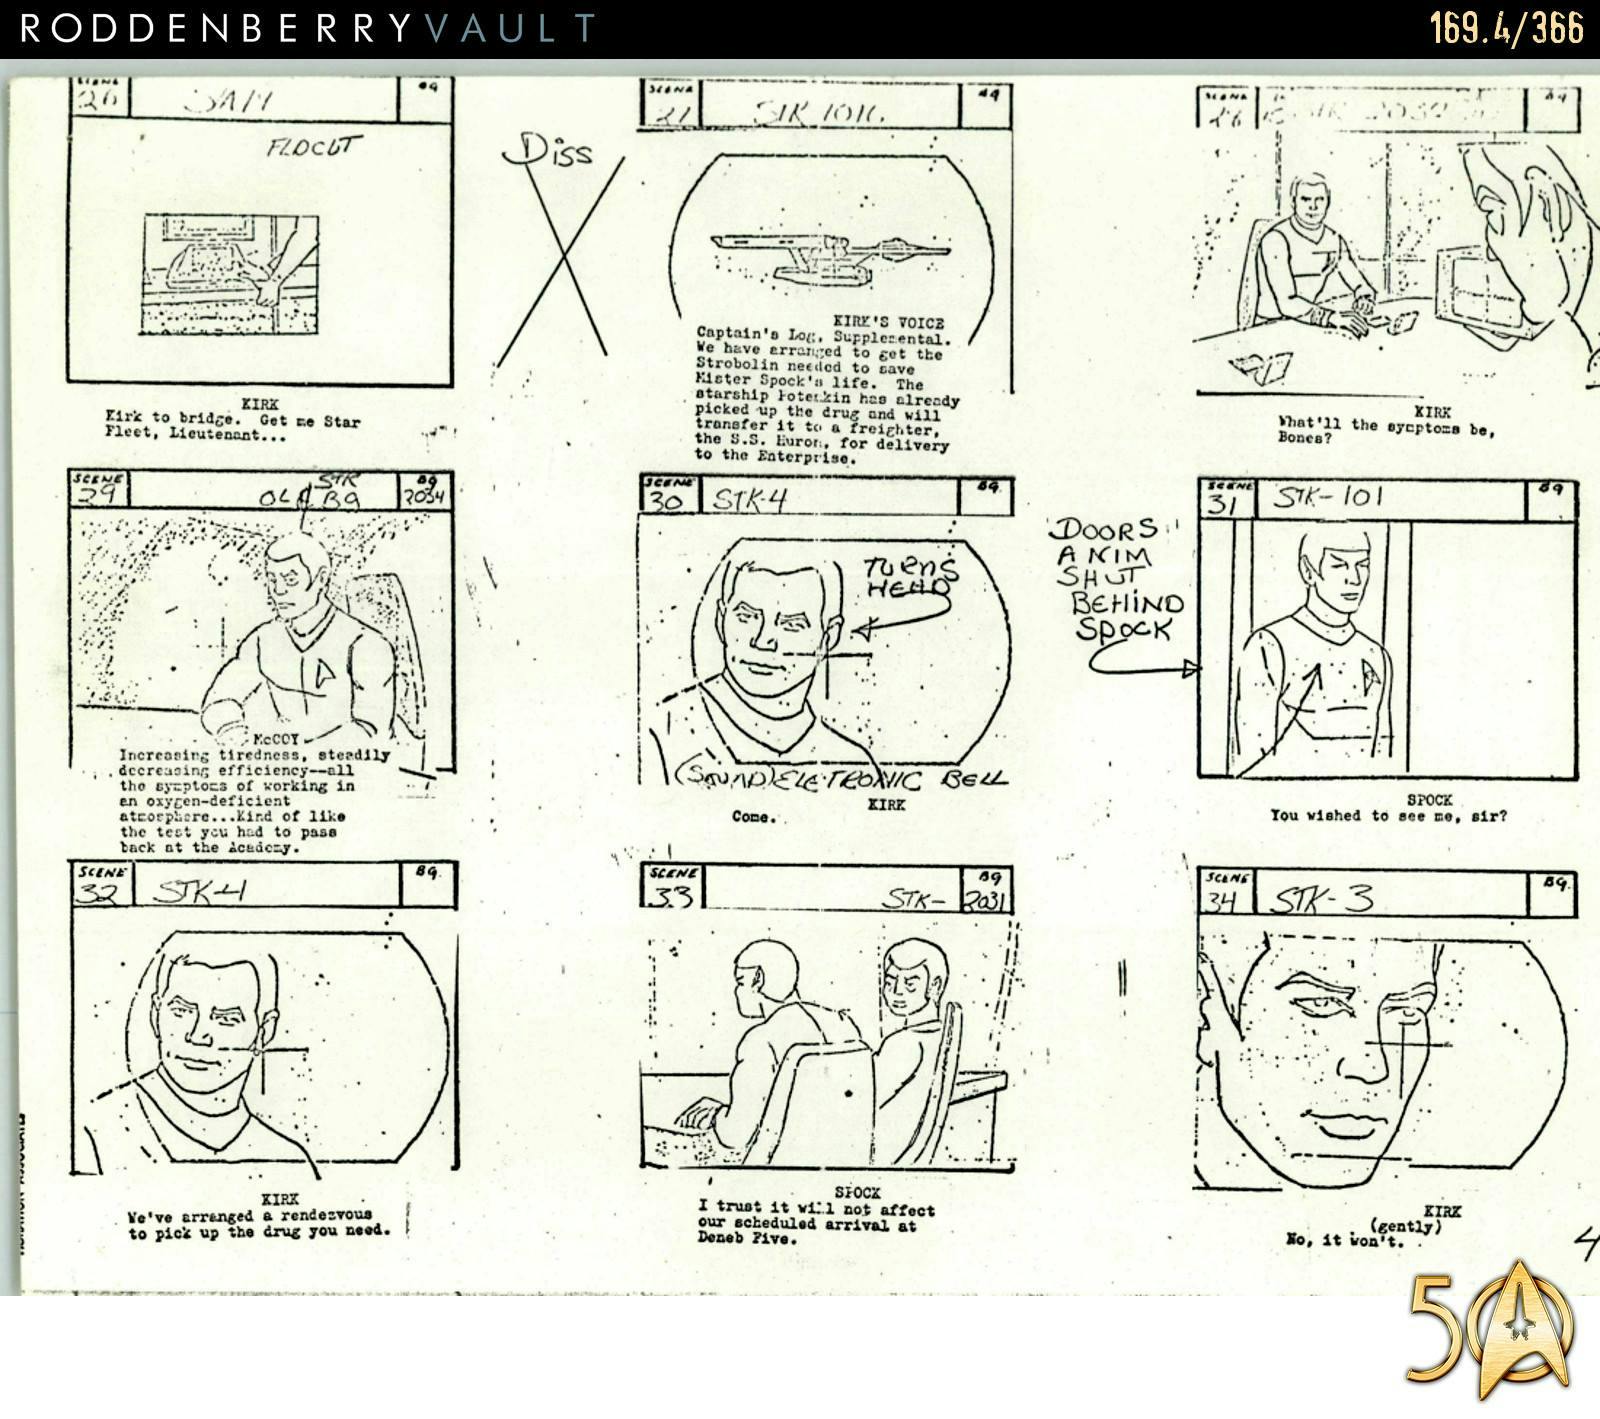 From the Roddenberry 366 Vault - The Animated Series - 'The Pirates of Orion' storyboards